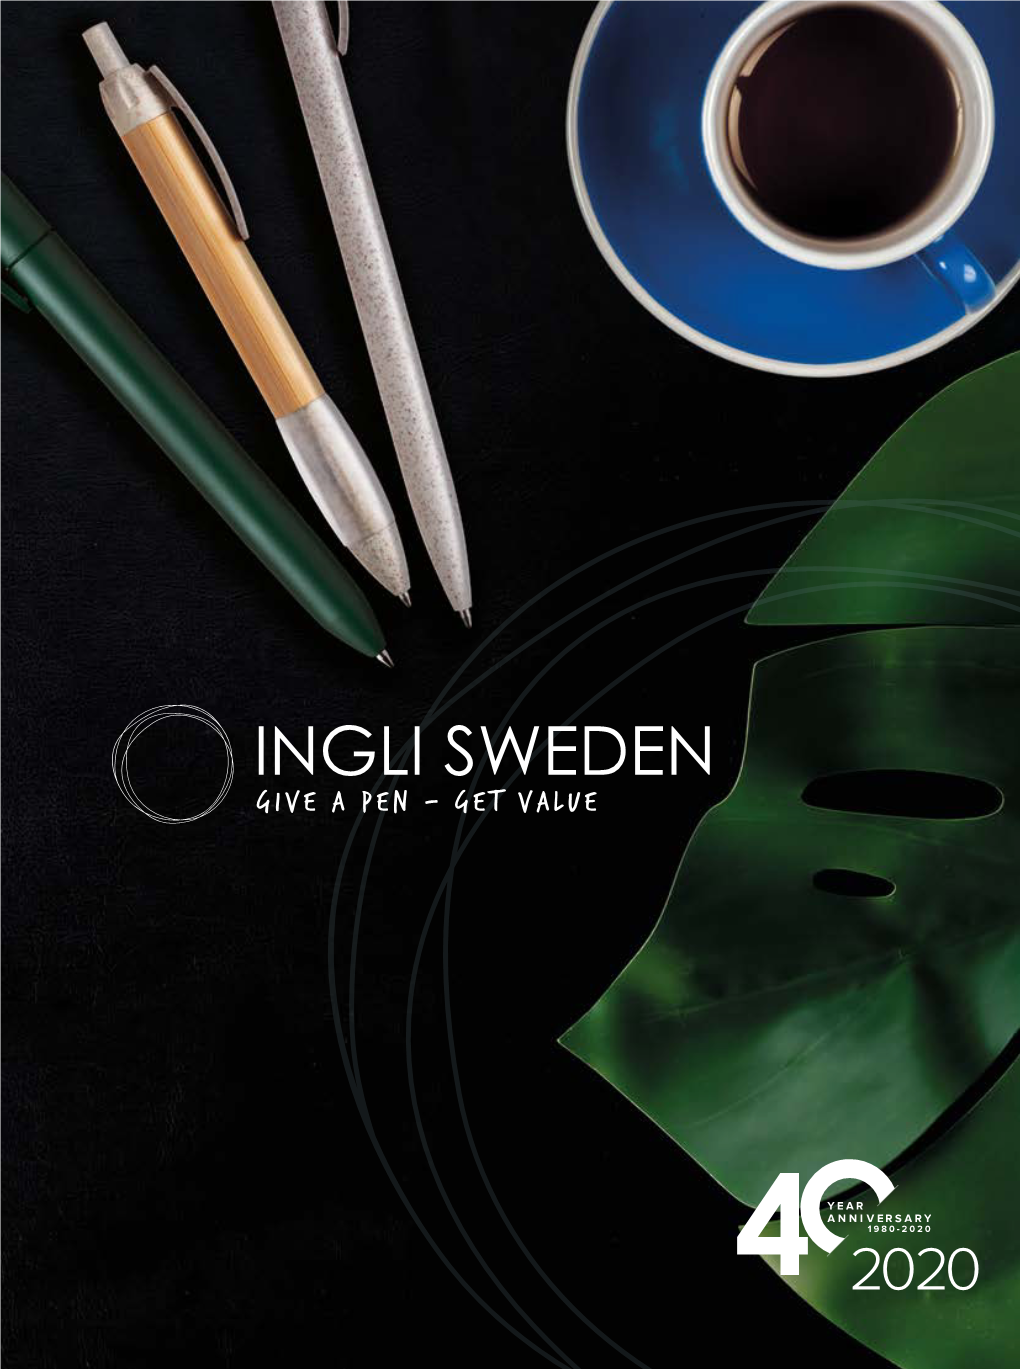 Inglisweden Catalogue2020 W